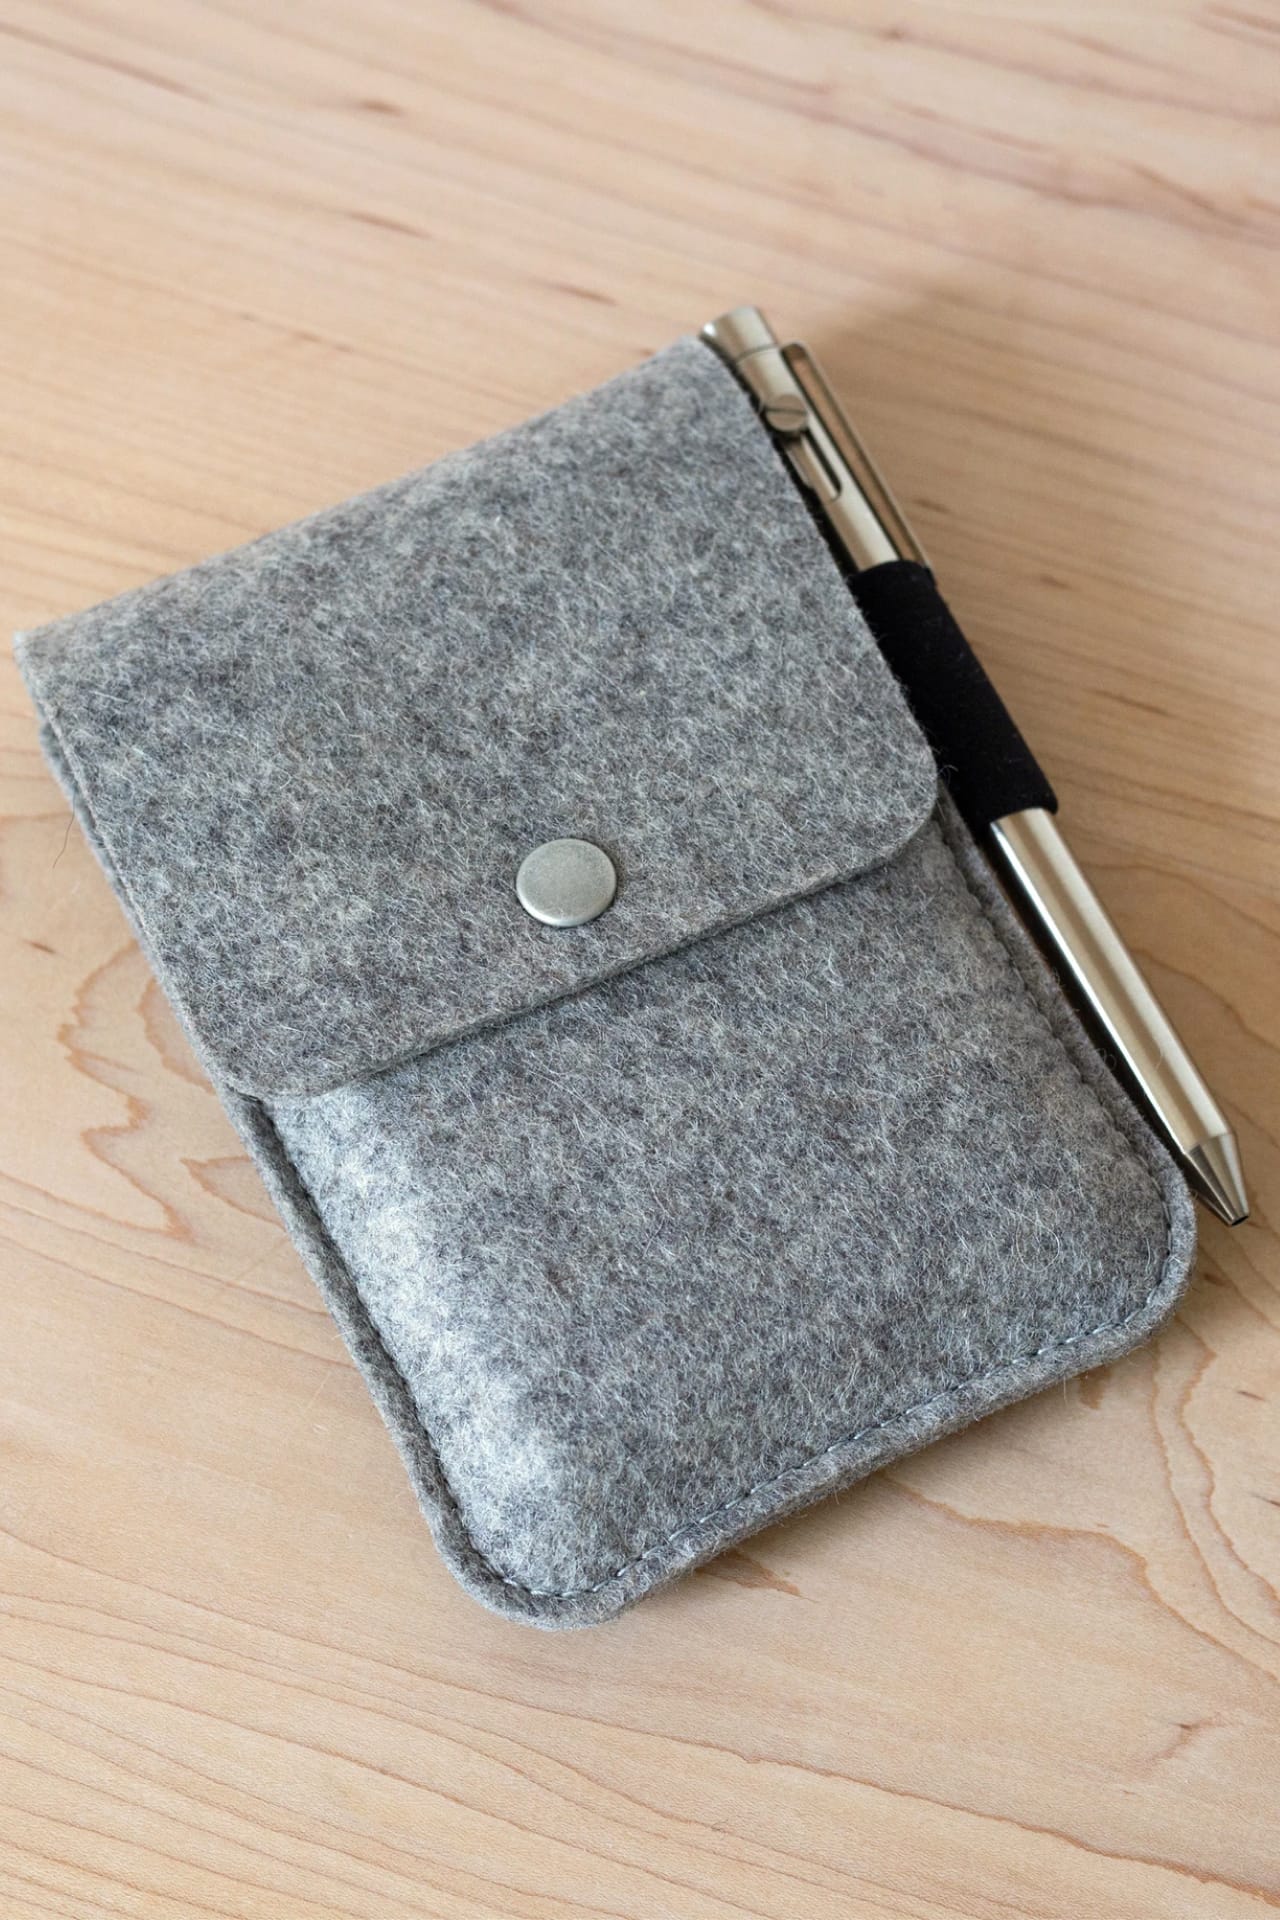 Textured gray felt pouch for paper cards with snap button flap and elastic pen holder loop.